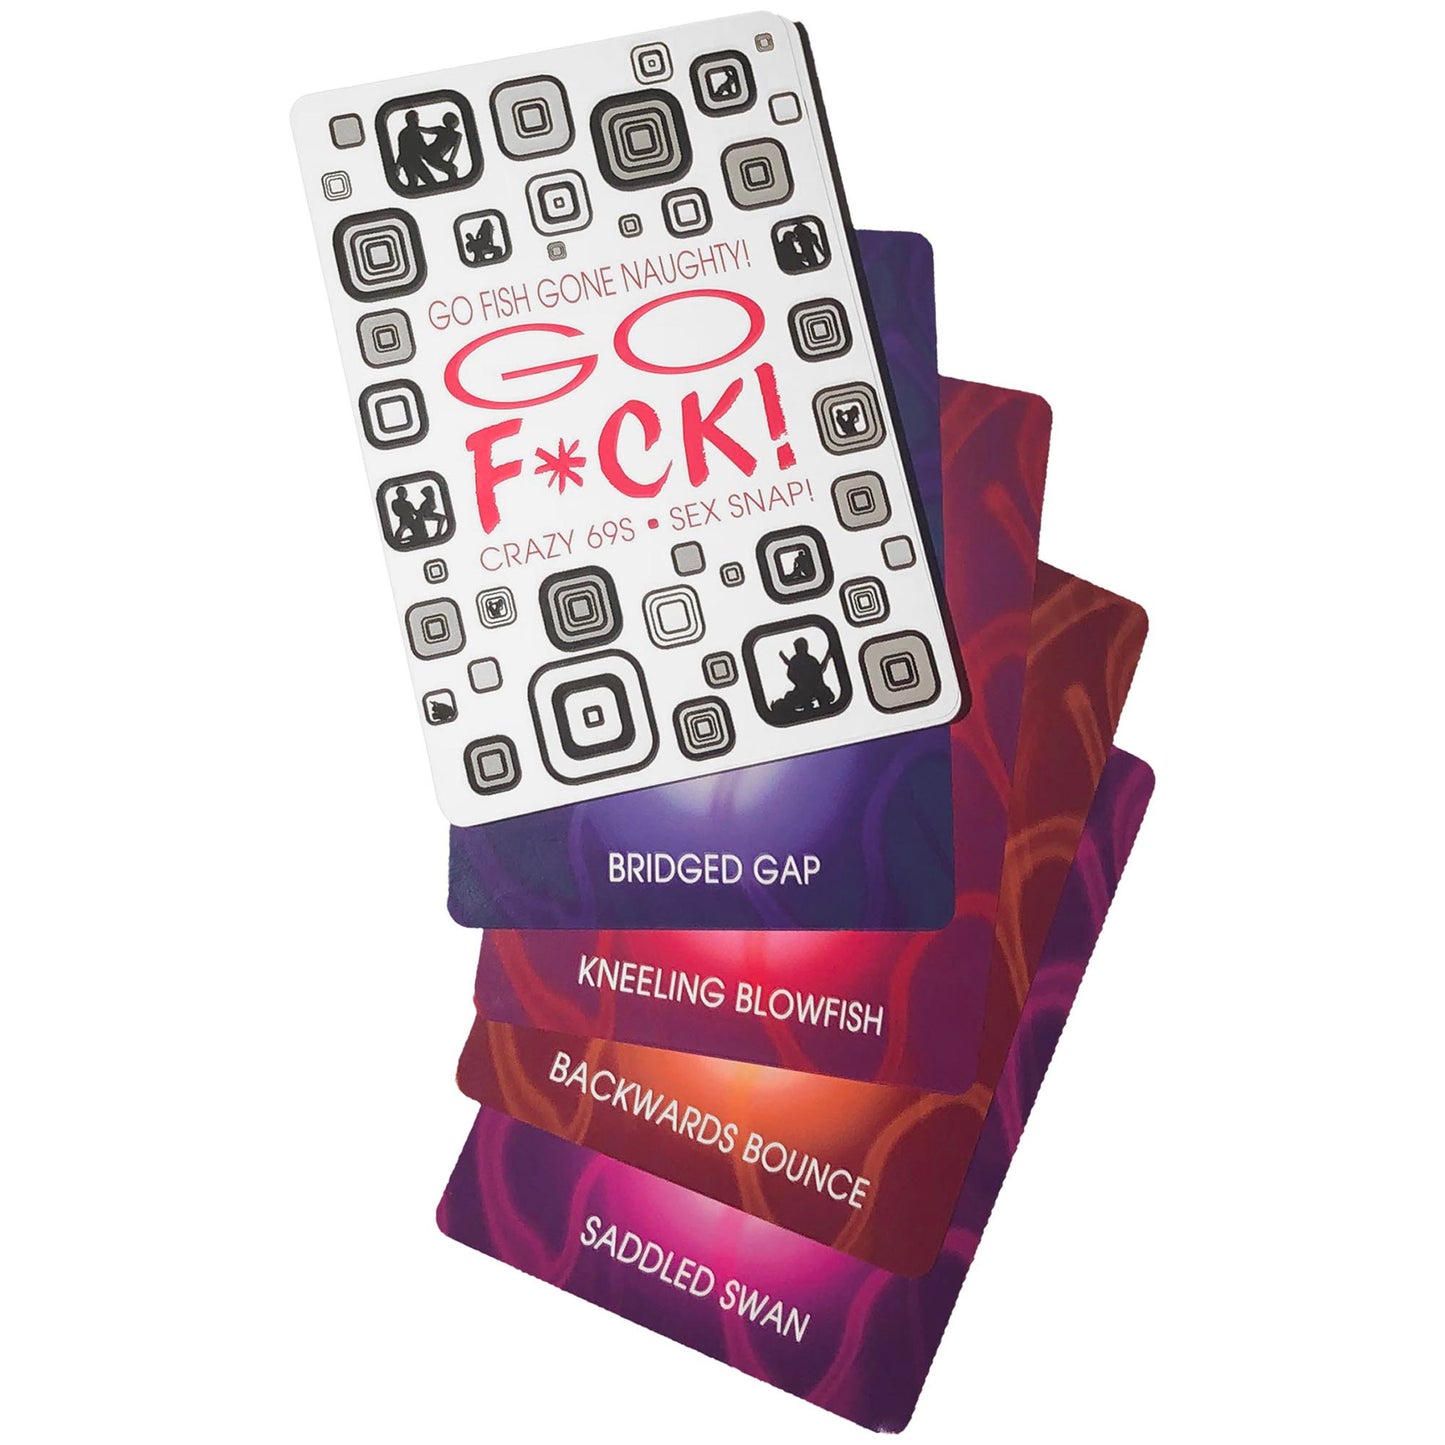 Go F*ck! Cards and card box.